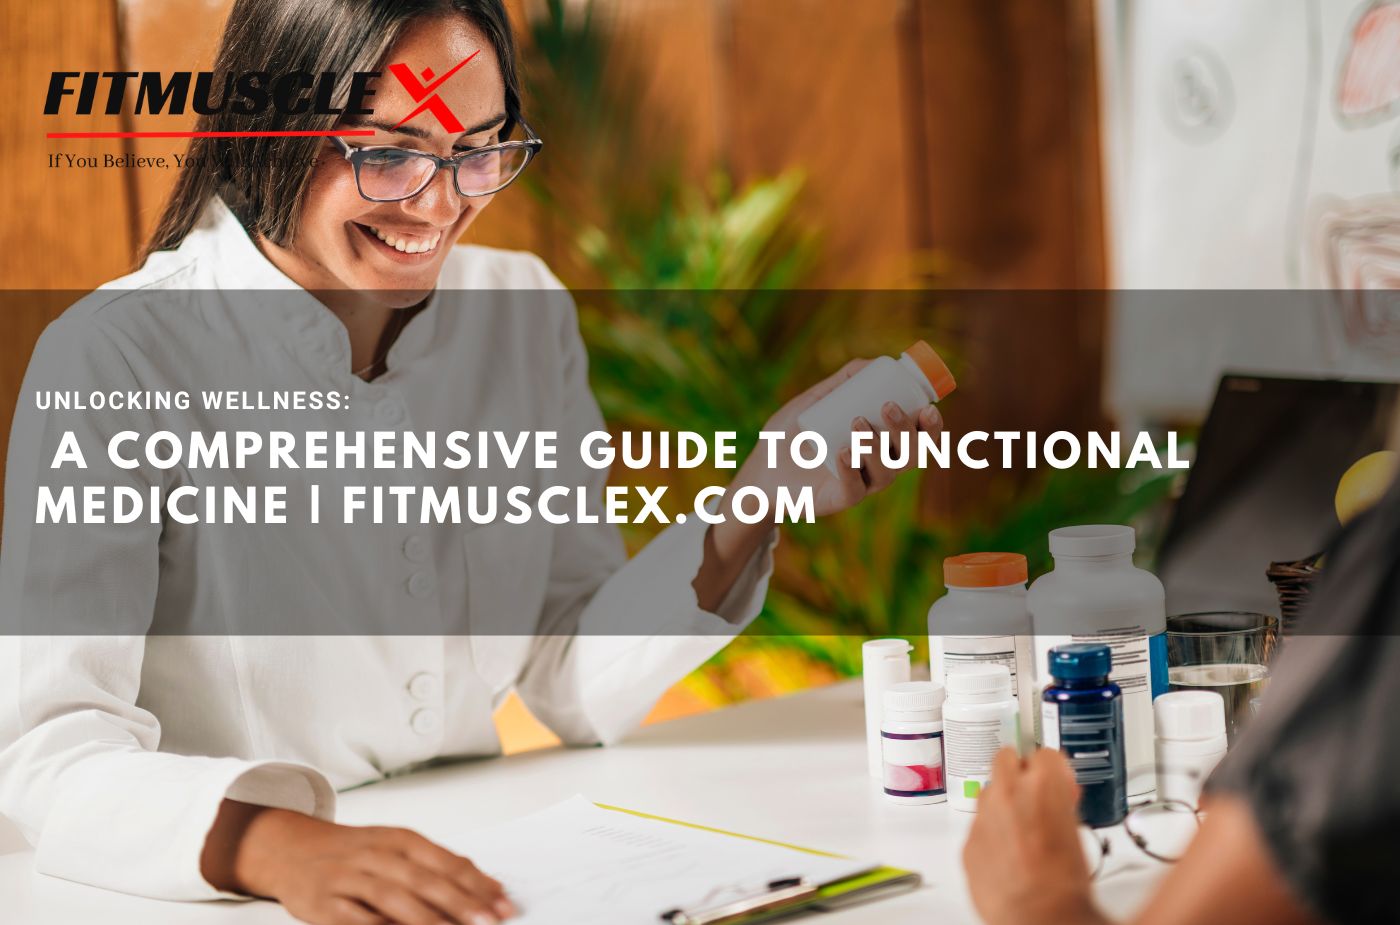 Guide to Functional Medicine | FitMuscleX.com